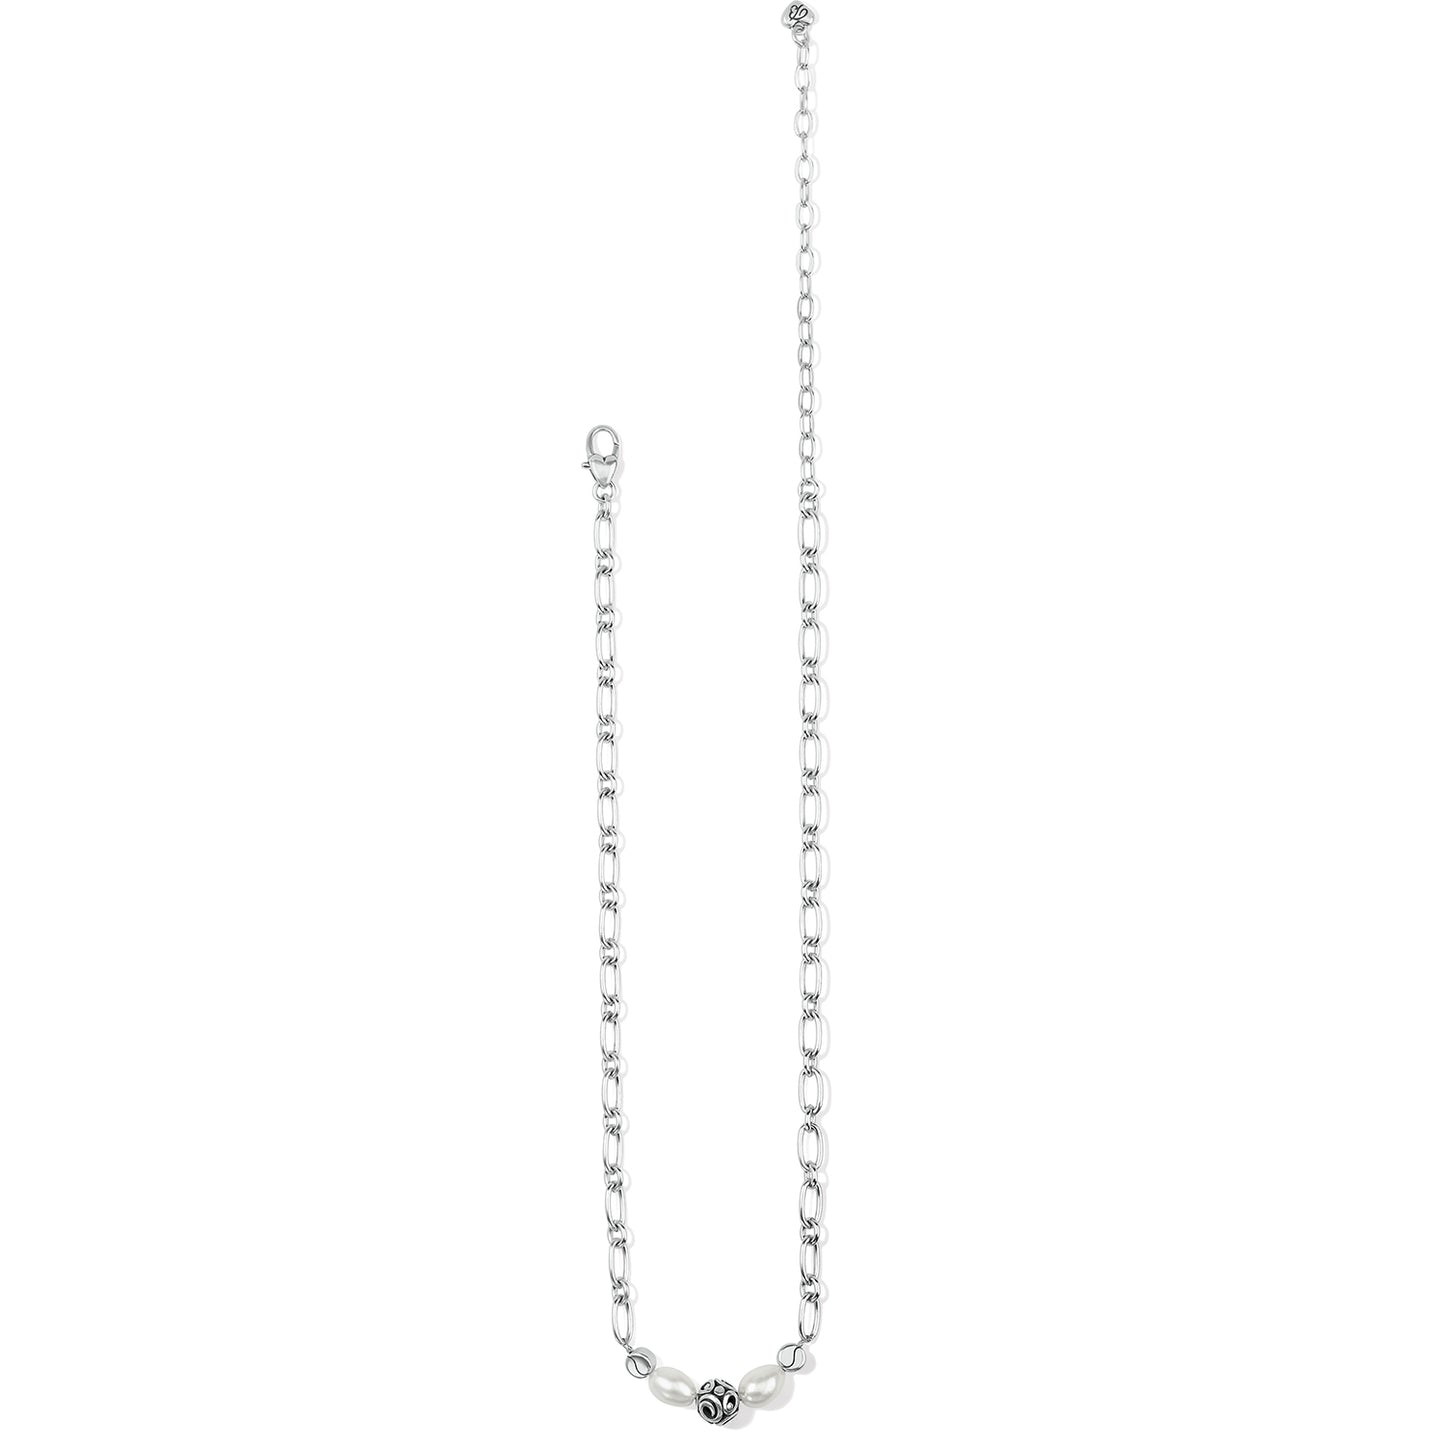 Contempo Pearl Short Necklace by Brighton inspired by silver jewelry artisans of Taxco, Mexico. Necklace features a single silver bead in the Contempo design in the center of two pearls on oval link adjustable chain. Measures 16" - 19 1/2". Shop at The Painted Cottage an Annapolis Boutique.